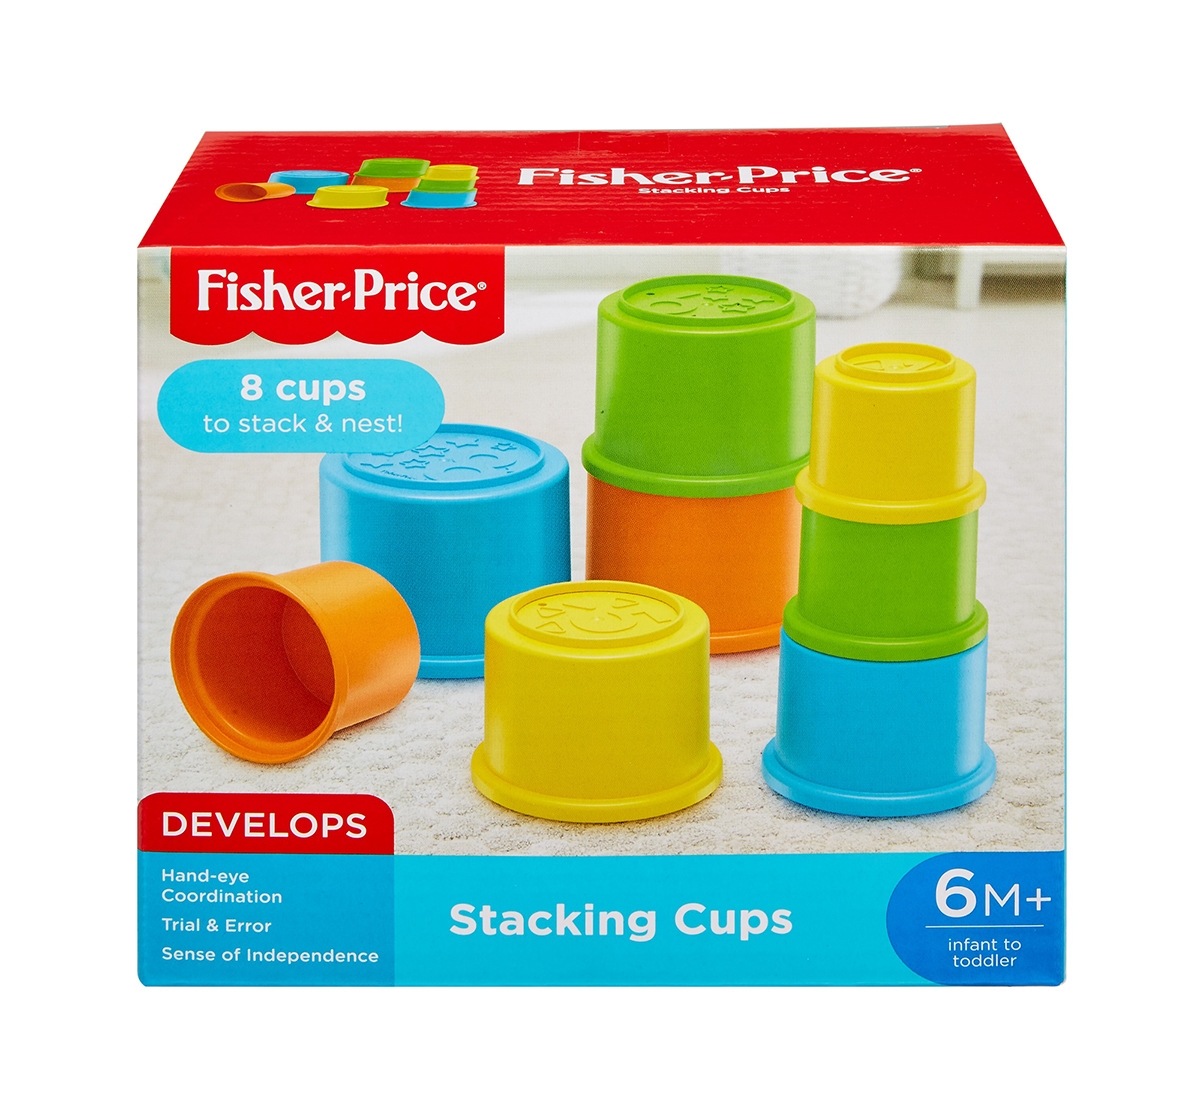 Fisher-Price | Fisher Price Stacking Cups Activity Toys for Kids age 6M+  3